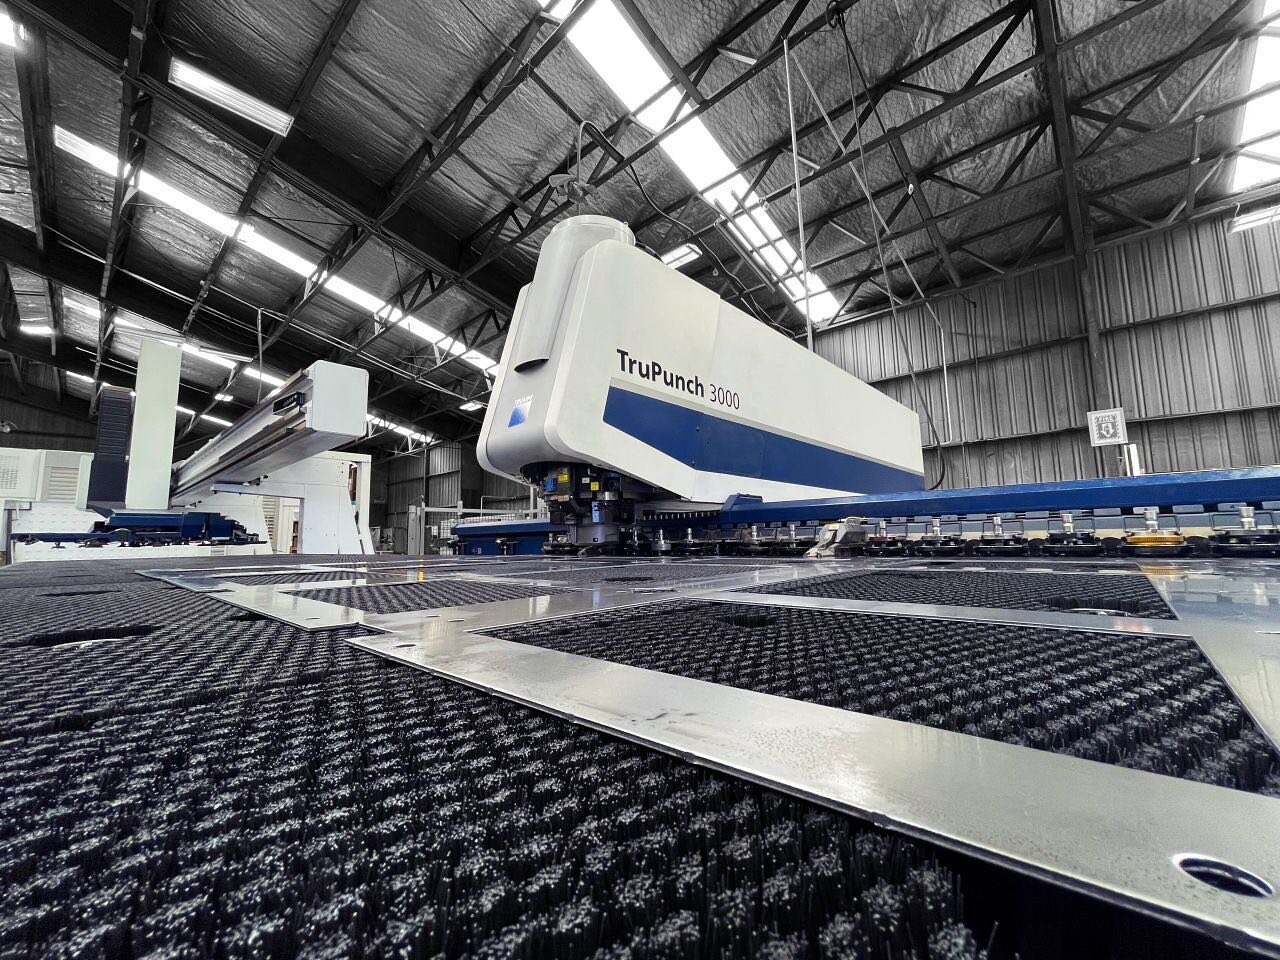 Check out one of our key pieces of machinery; the Trumpf TruPunch 3000. This machine offers us the highest level of processing flexibility giving us the ability to produce simple workpieces through to complex examples with numerous different cuts, ho